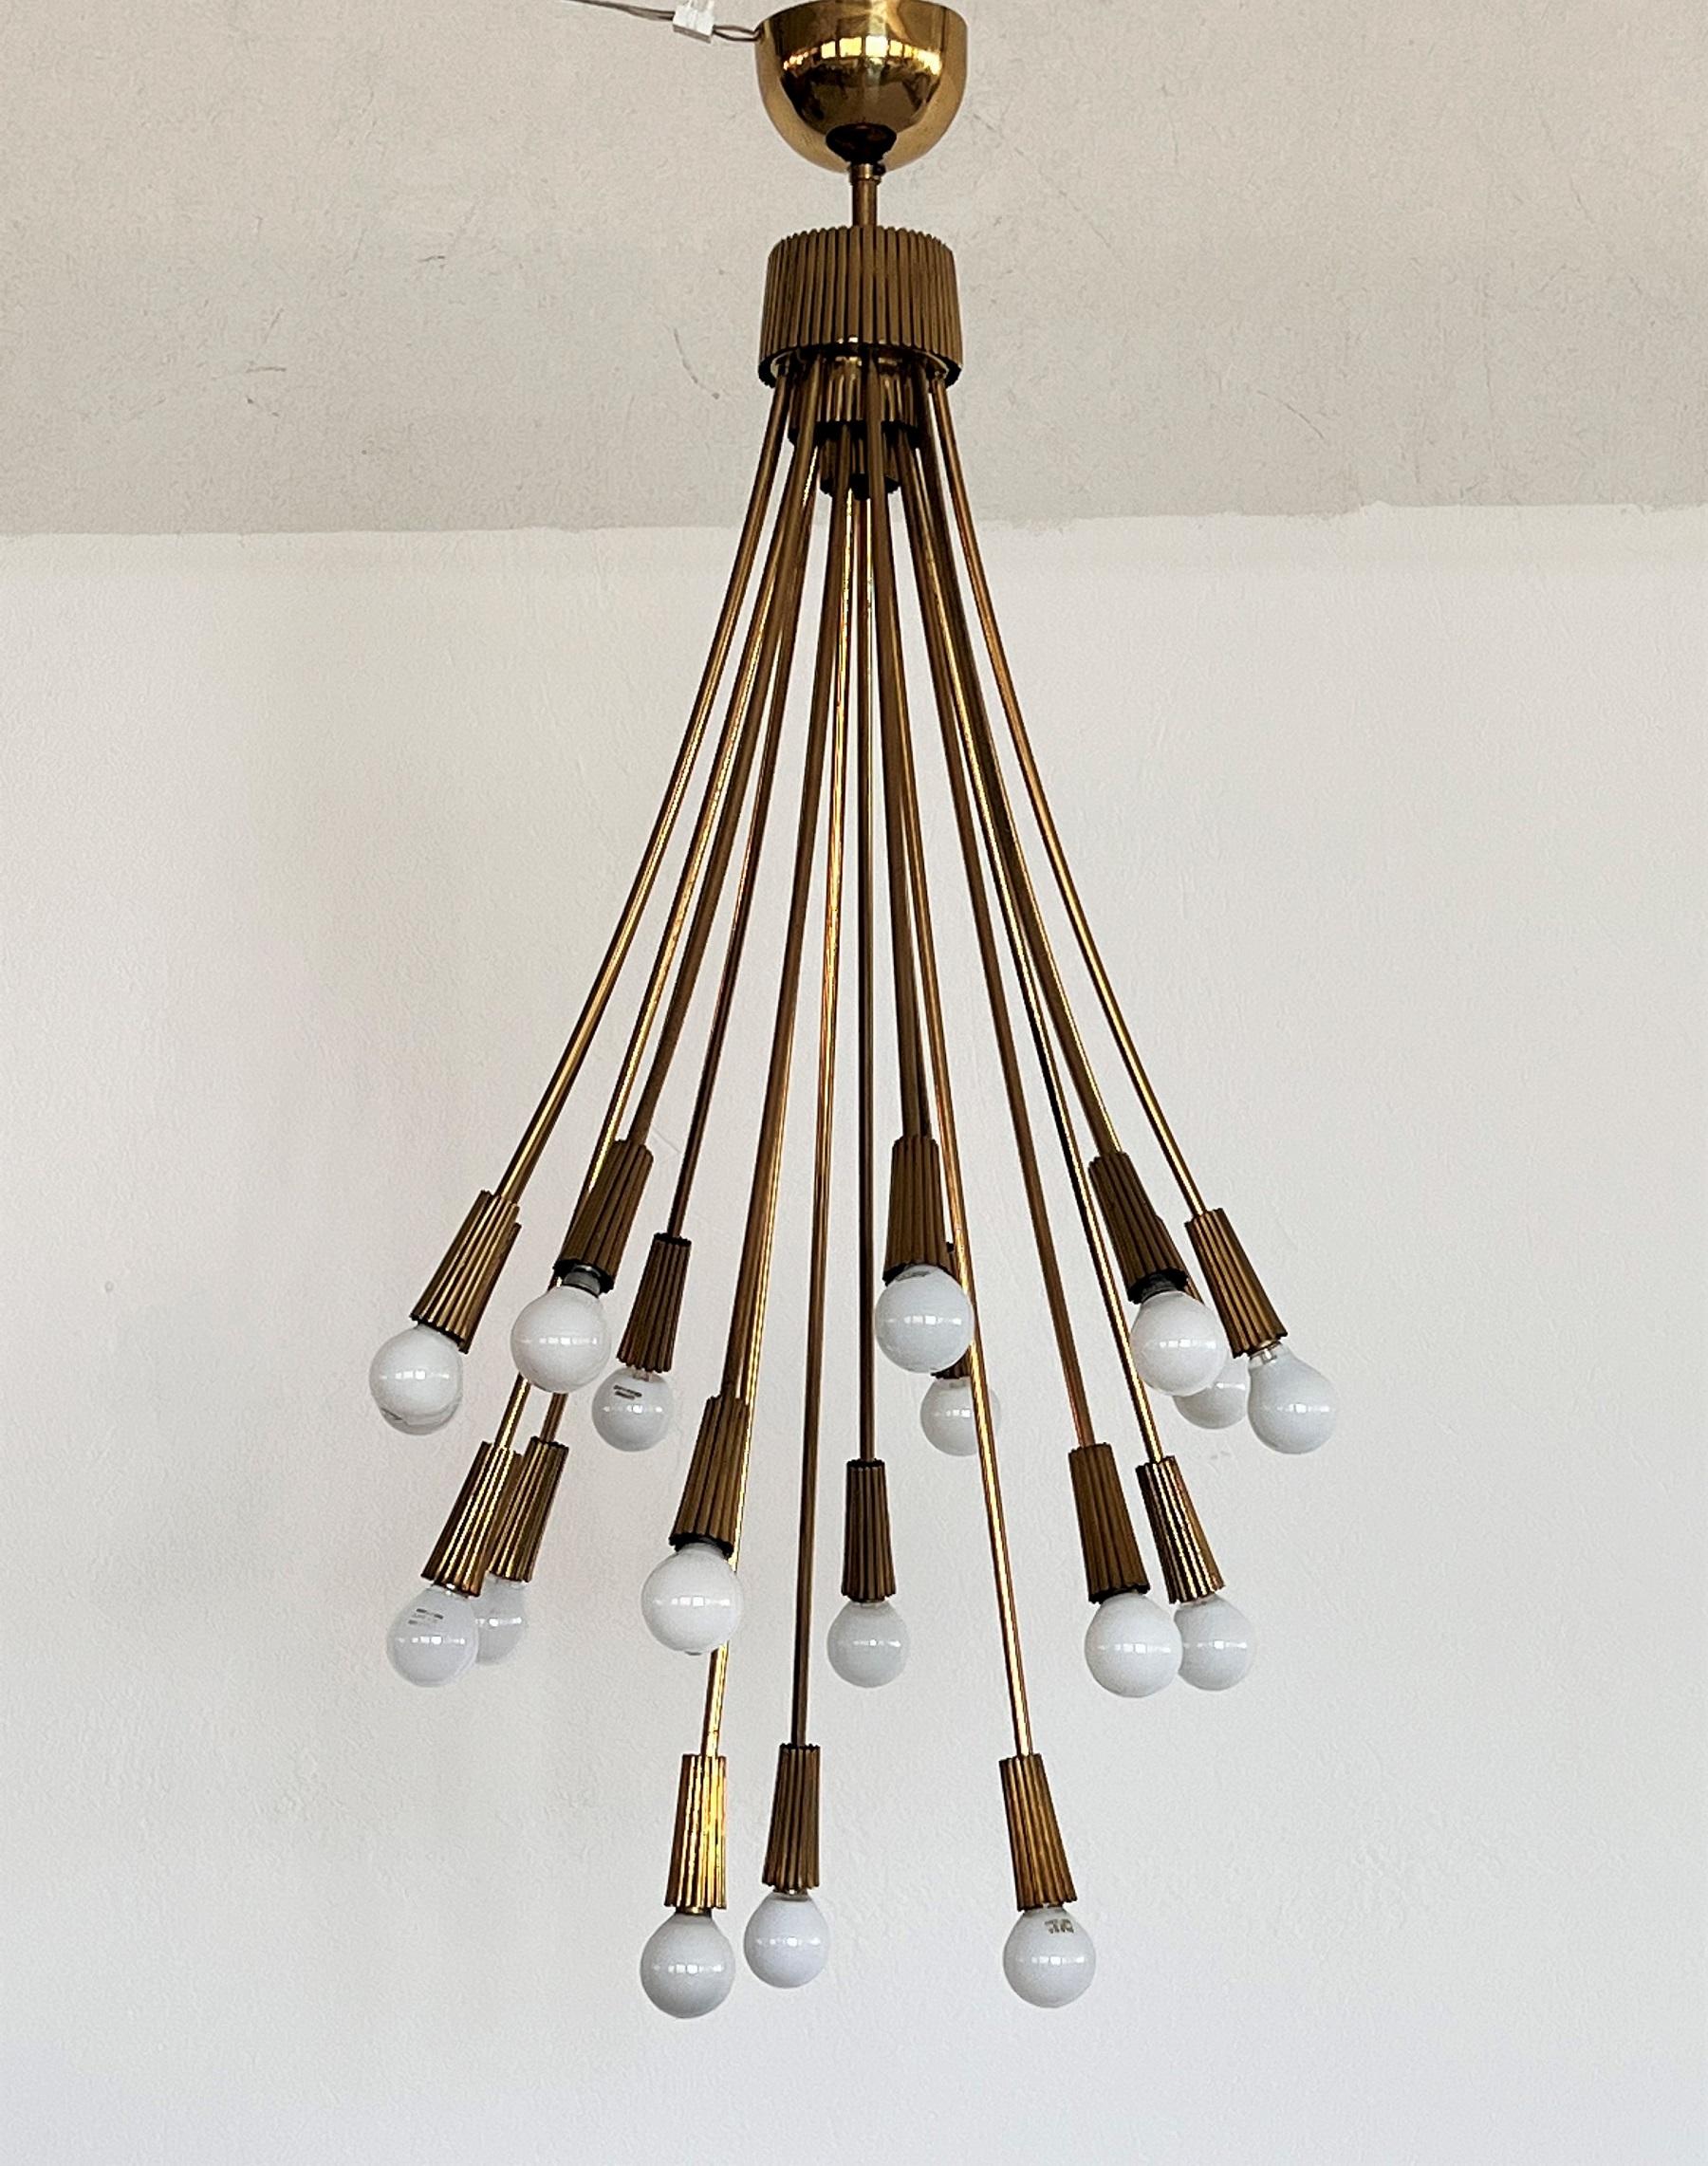 Rare, beautiful and unusual brass chandelier.
Made in Italy in the 60s - 70s.
The chandelier has a total of 18 arms for 18 small candelabra bulbs.
There is a double switch so you can either turn on only 9 bulbs, or all 18 bulbs.
The chandelier is in